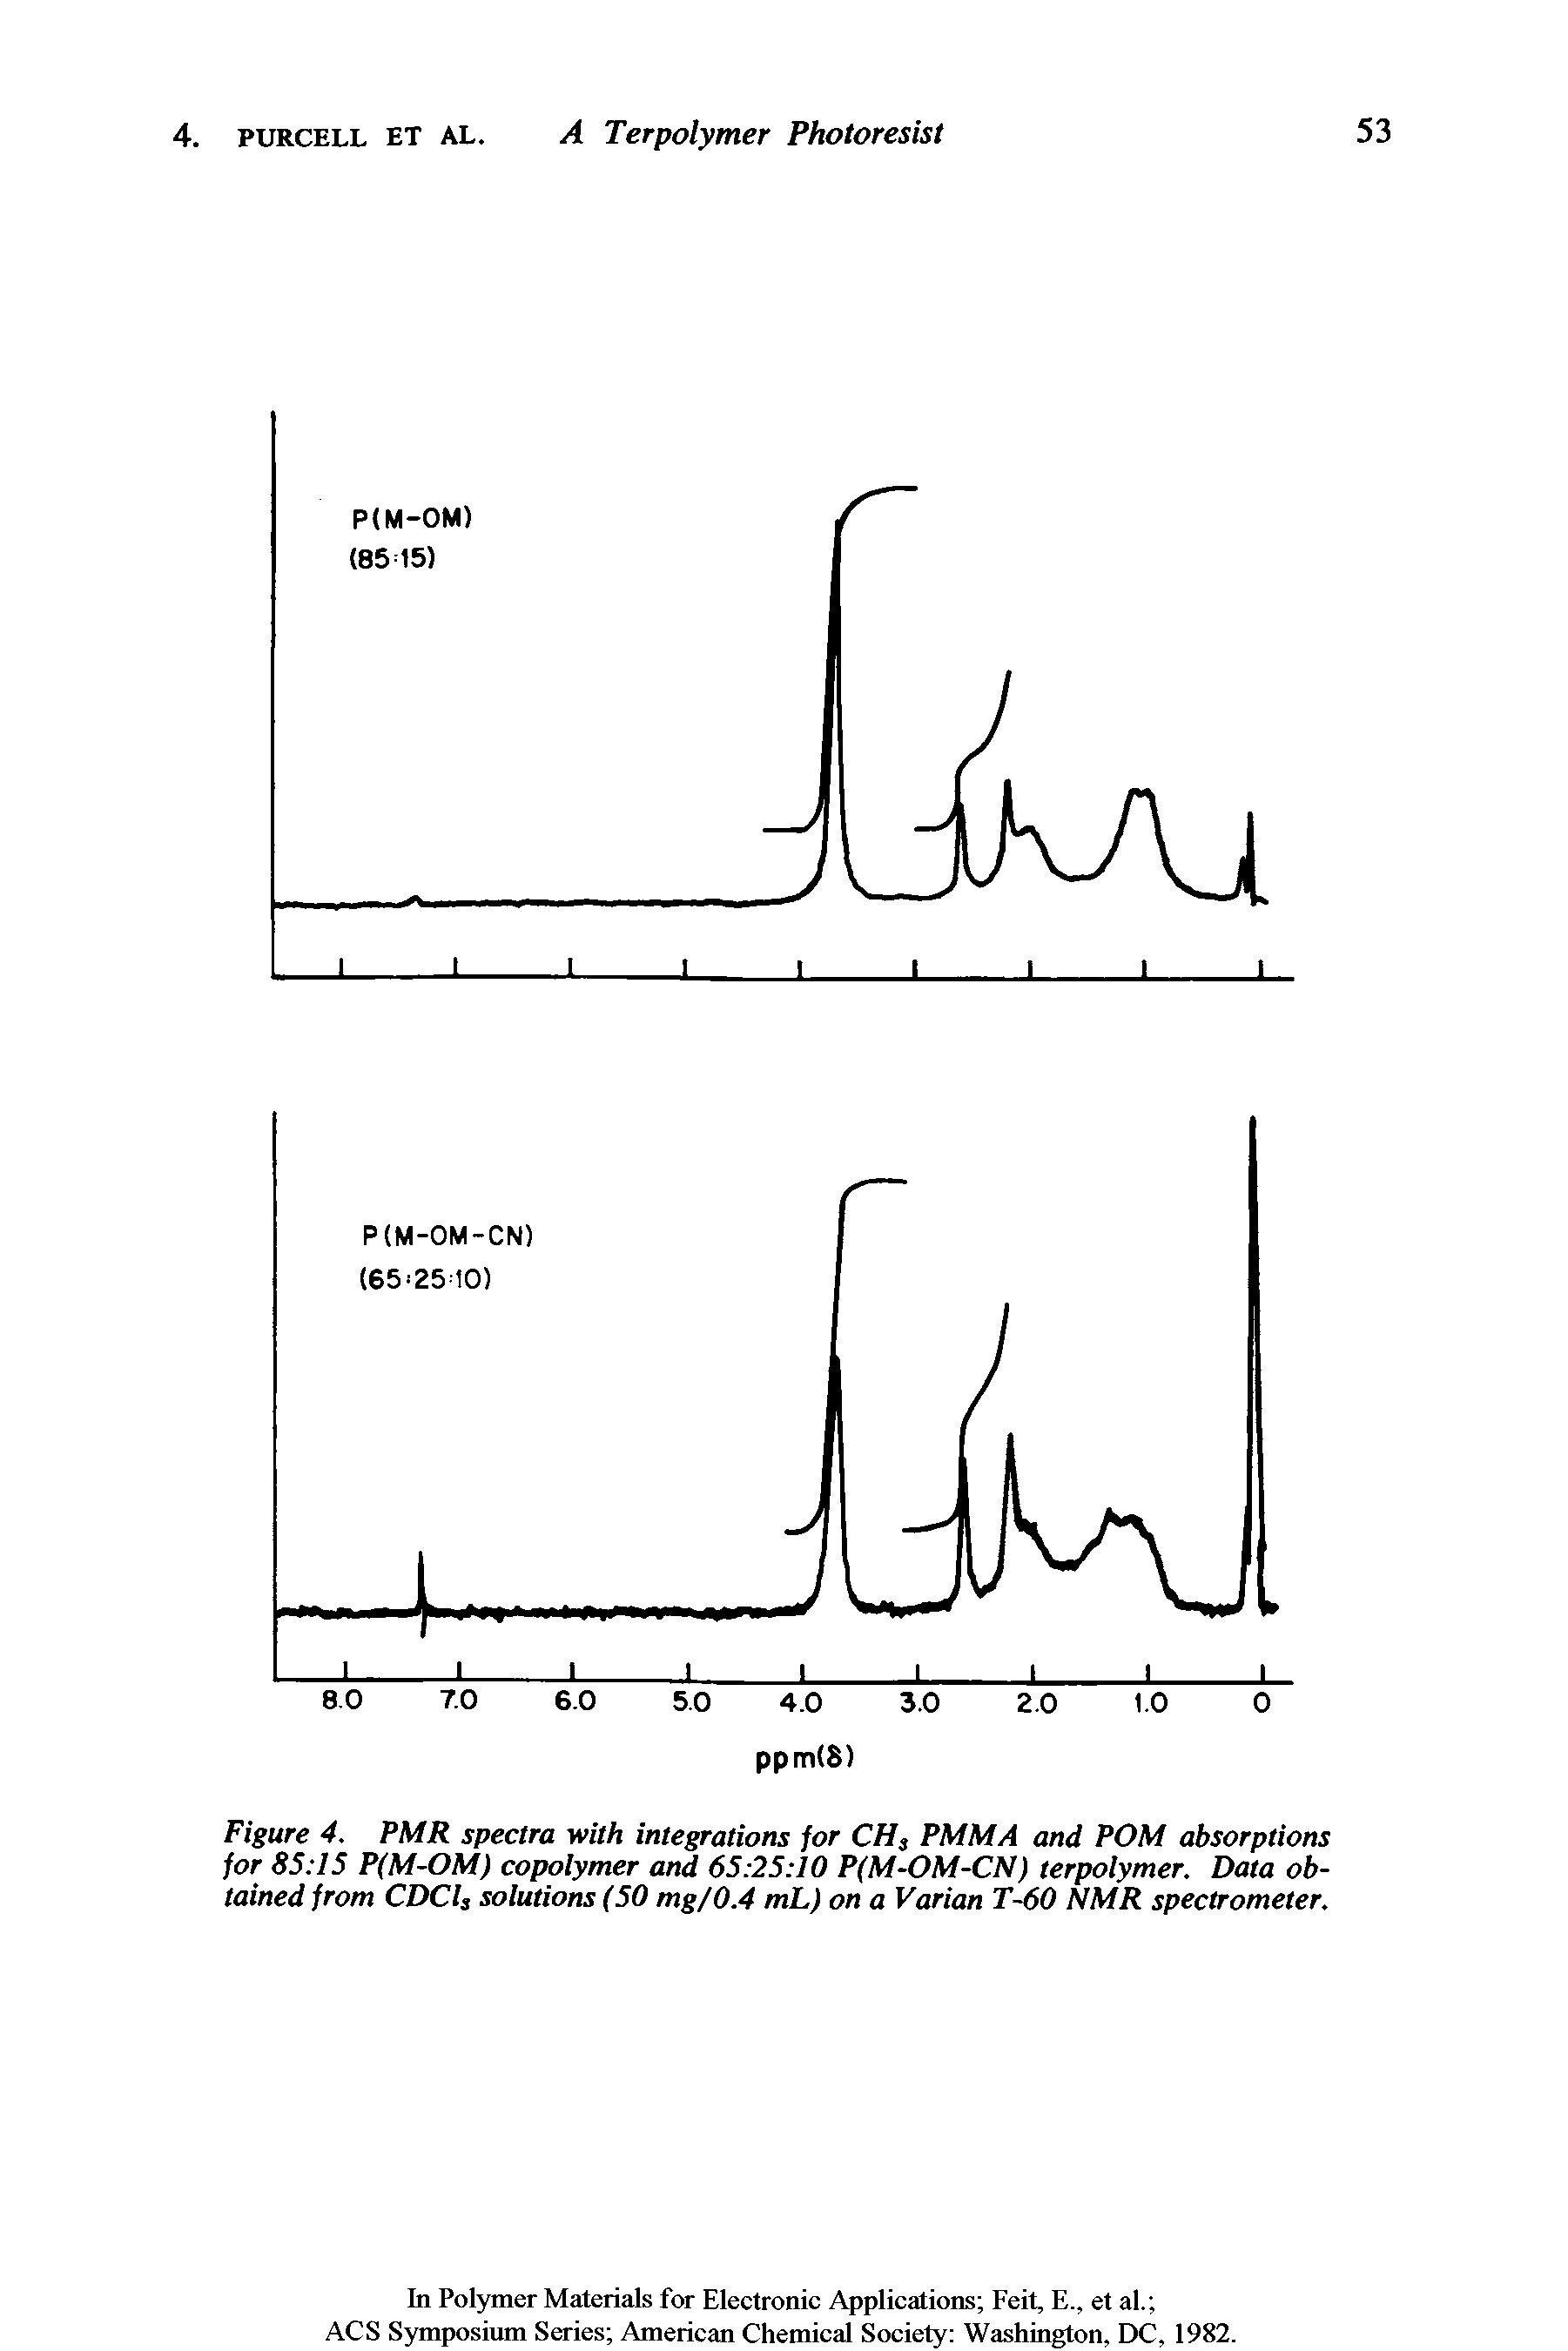 Figure 4. PMR spectra with integrations for CH, PMMA and POM absorptions for 85 15 P(M-OM) copolymer and 65 25 10 P(M-OM-CN) terpolymer. Data obtained from CDCls solutions (50 mg/0.4 mL) on a Varian T-60 NMR spectrometer.